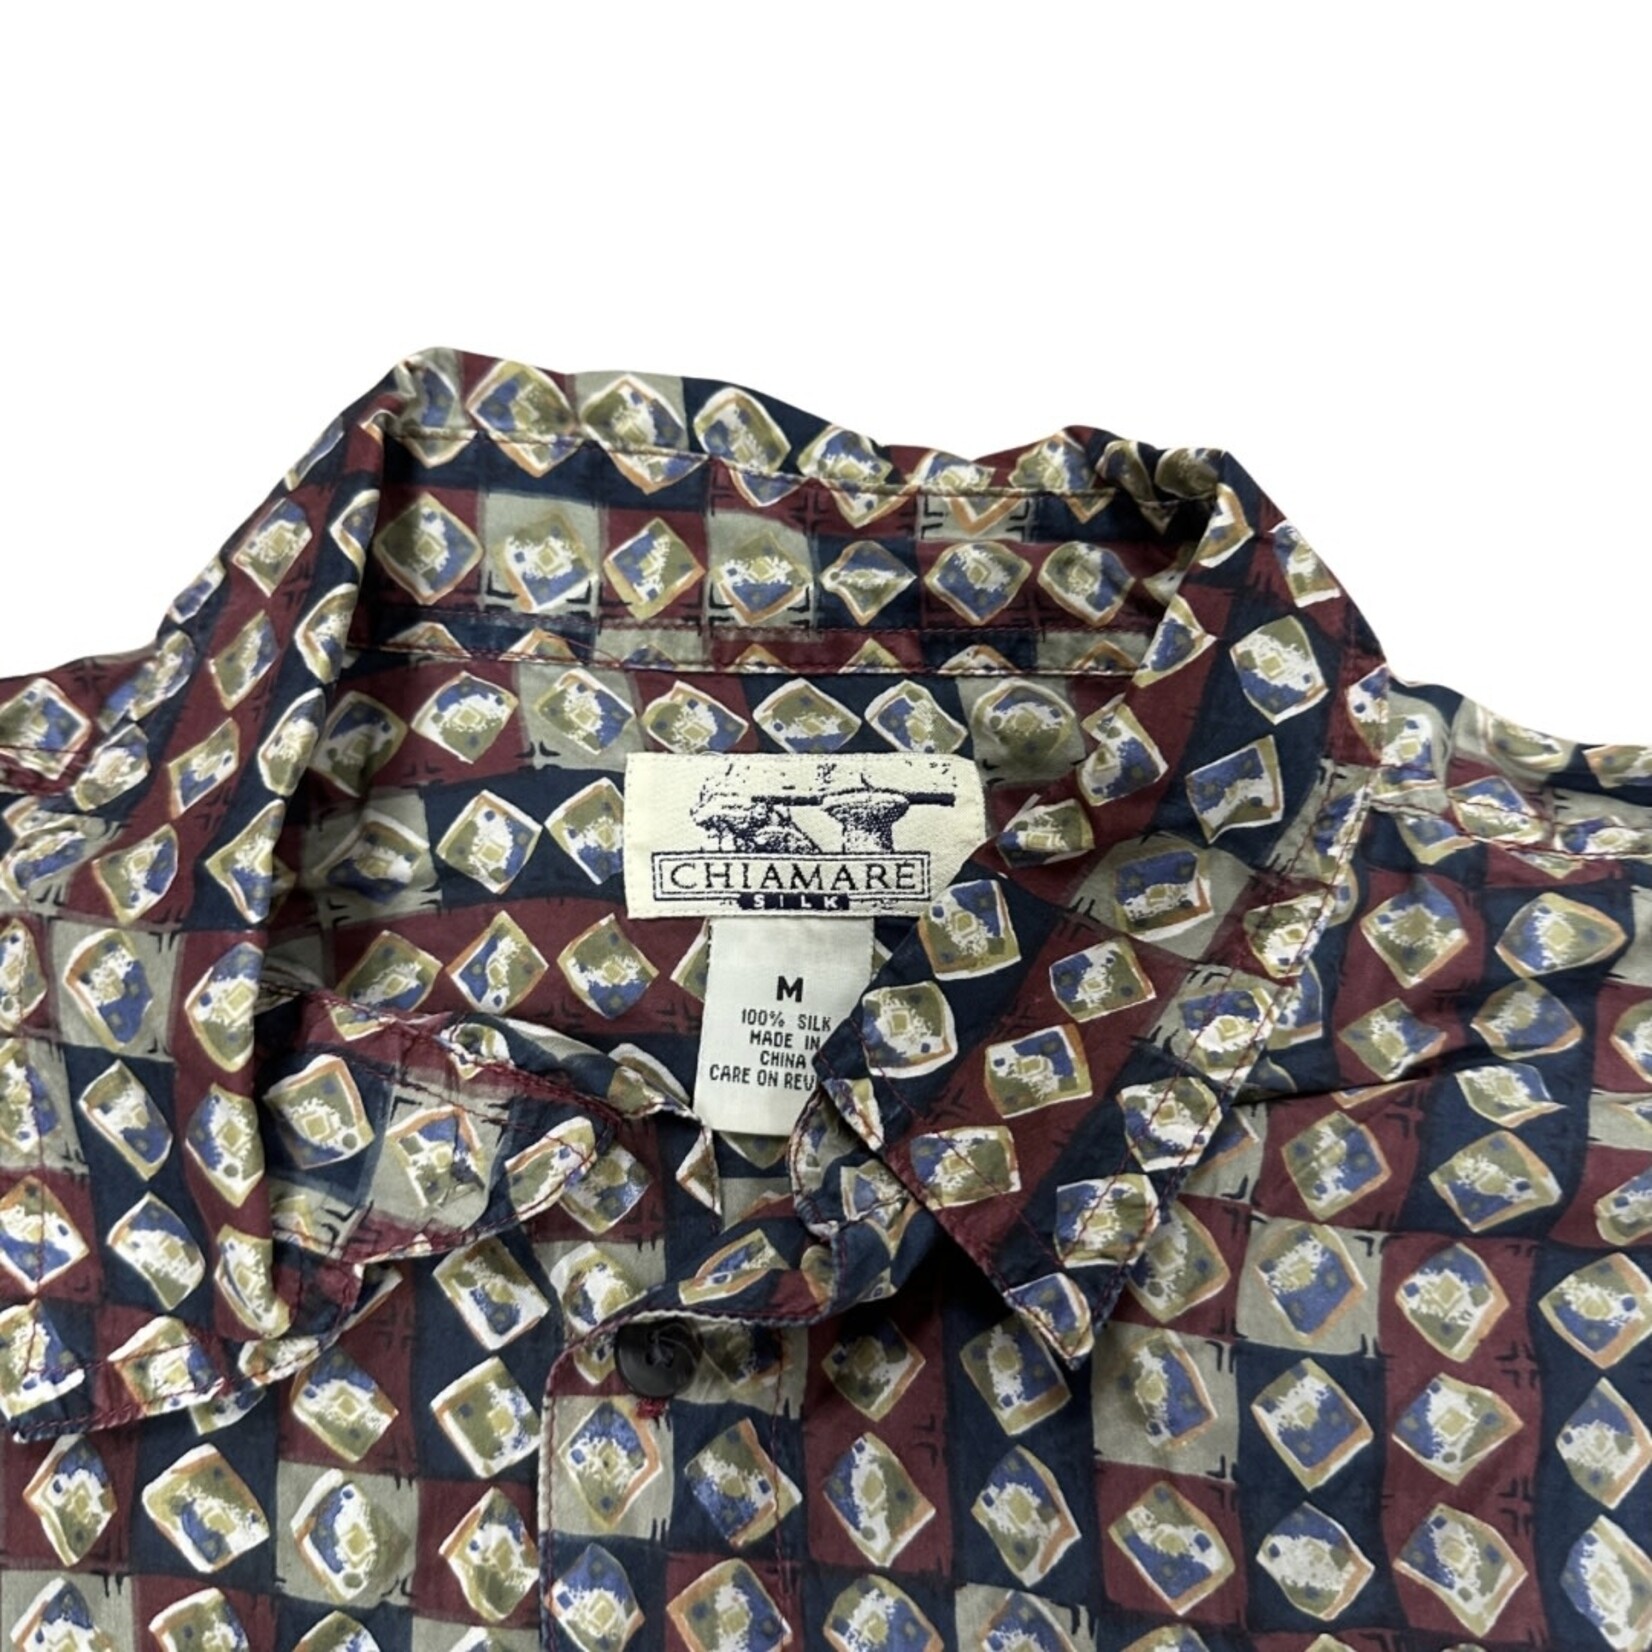 Mission Zero Men’s Vintage Aloha Shirt- M -Chimare - 100% Silk Long Sleeve Squares in Squares